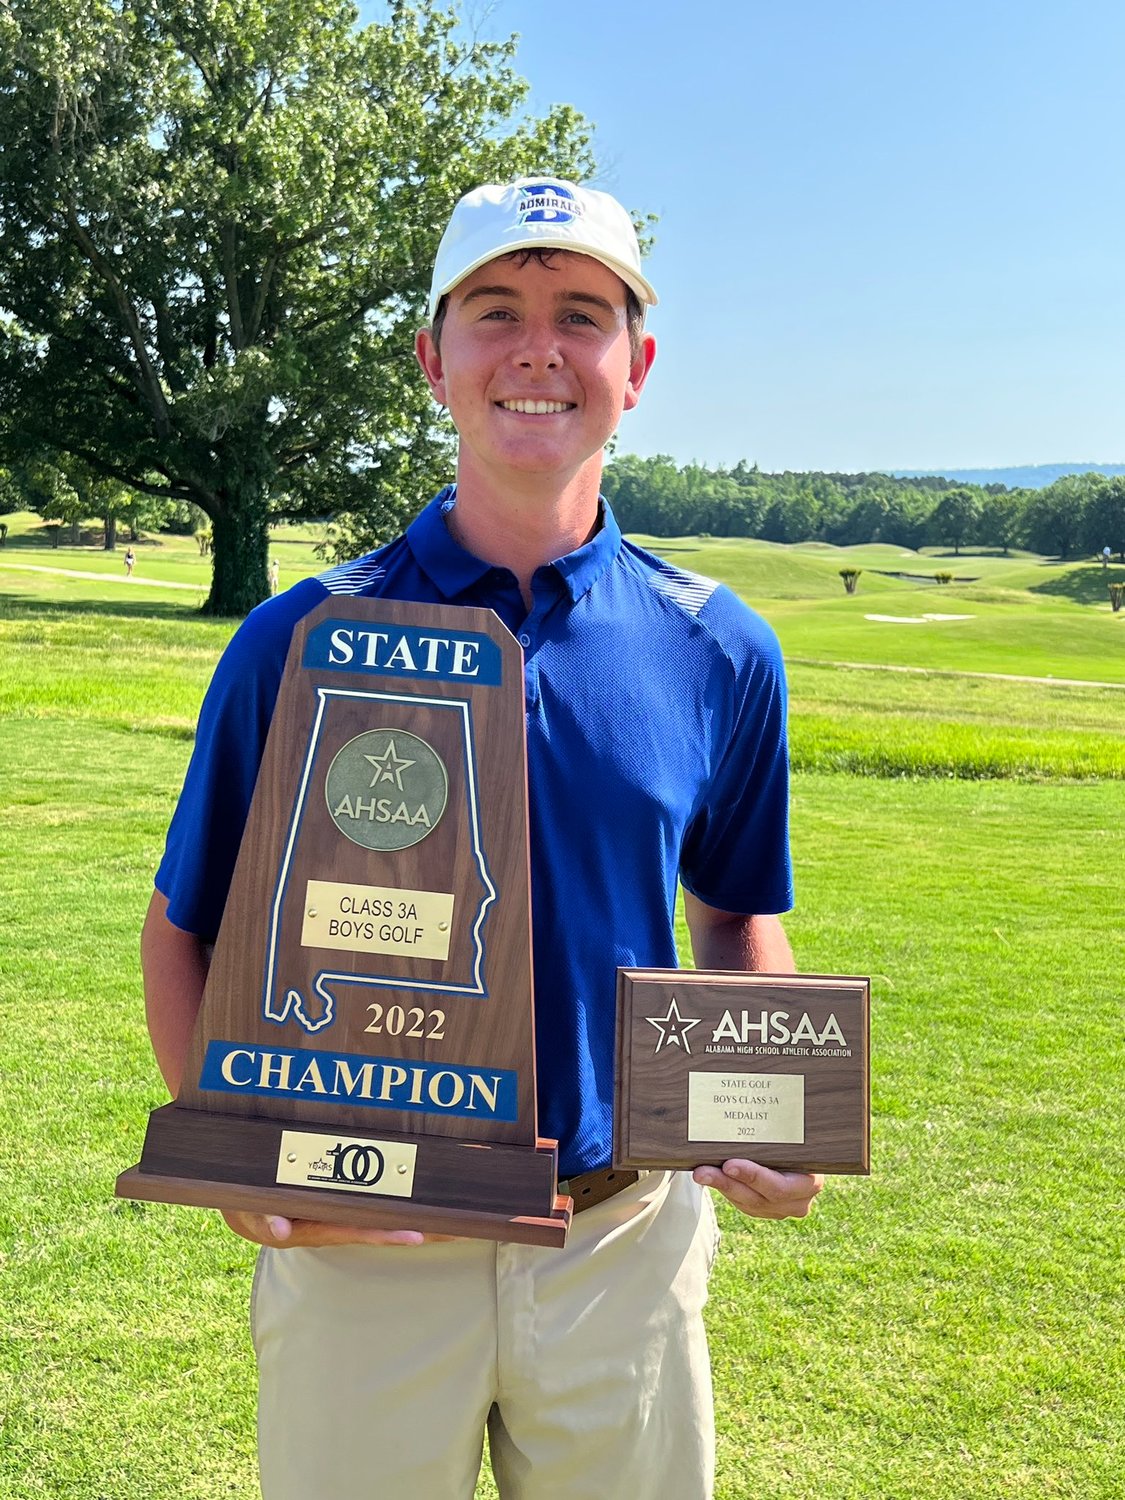 Cole Komyati helped the Bayside Academy boys’ golf team claim the Class 3A state championship alongside his individual state title this spring. As part of the nationwide MaxPreps Cup recognizing state champions, the Admirals were ranked 16th in the country with eight total state titles in 2021-2022.